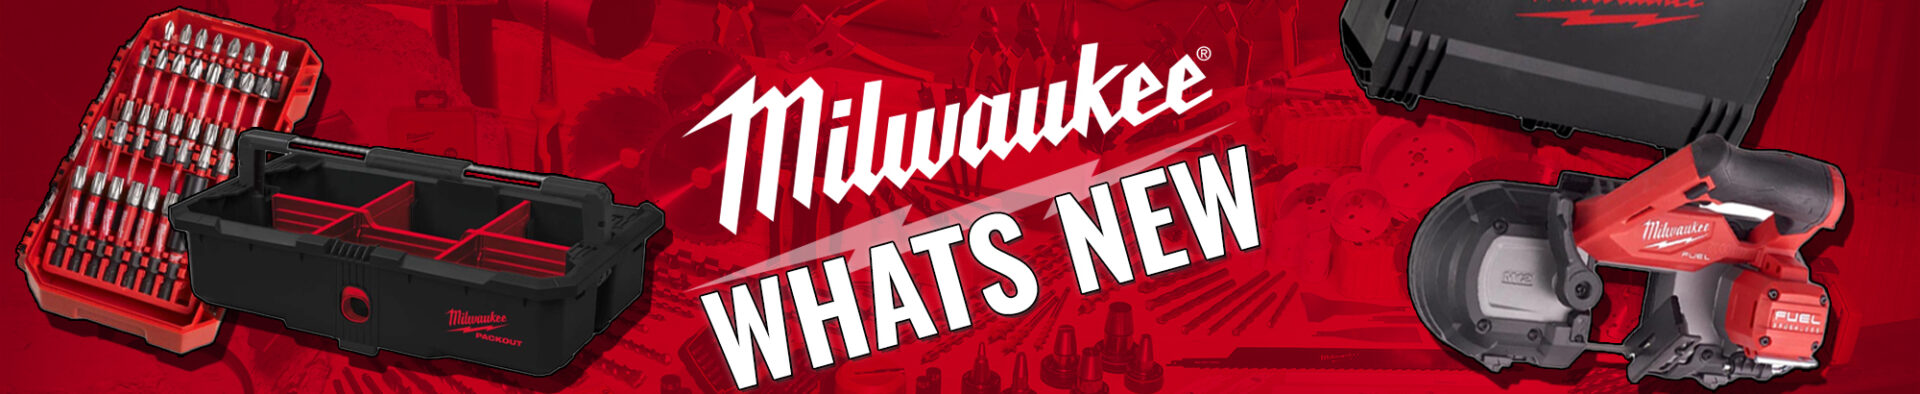 Banner for Milwaukee whats new page